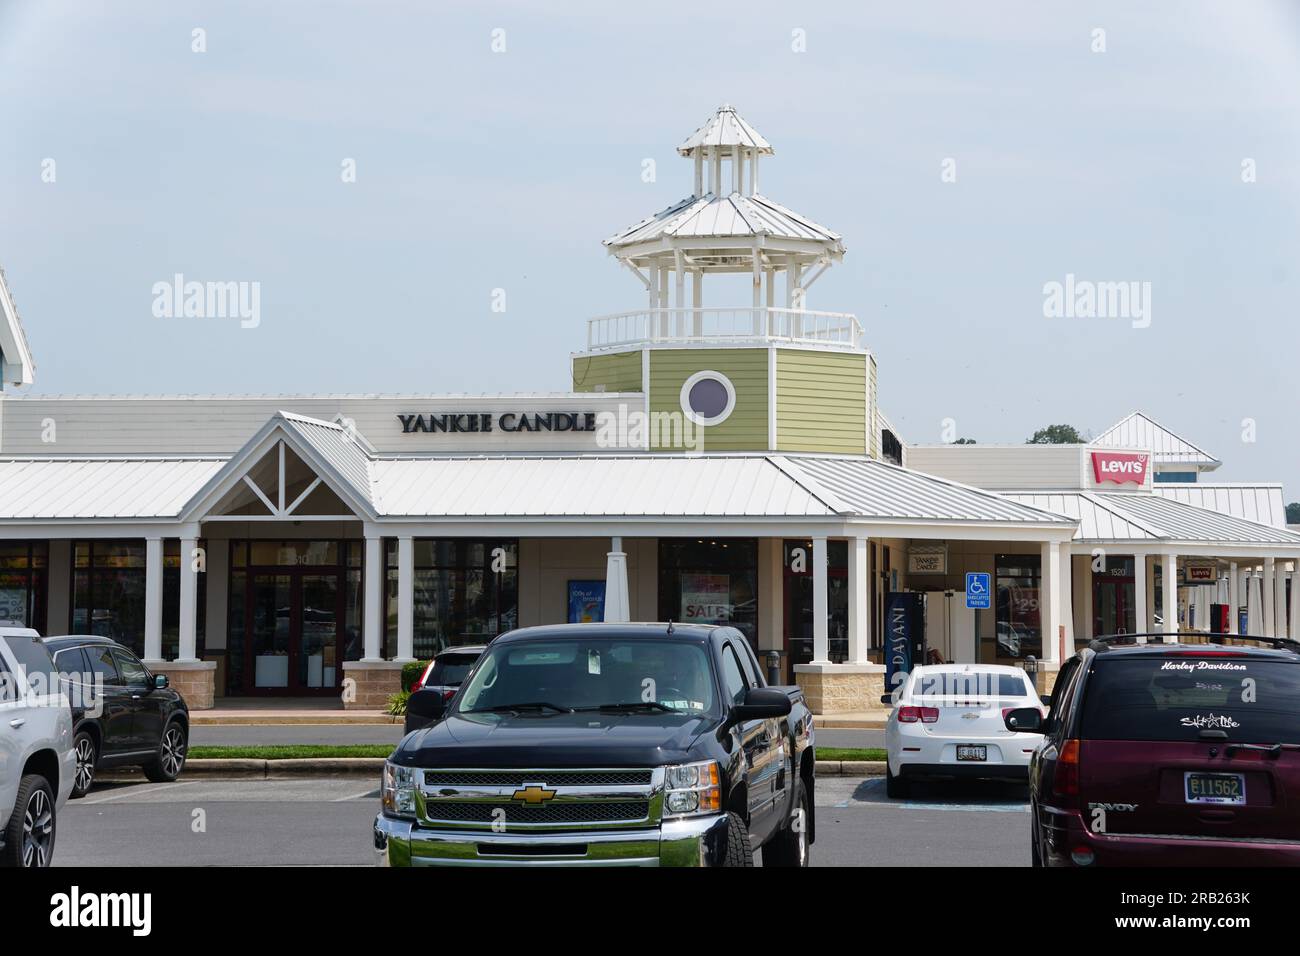 Rehoboth Beach, Delaware, U.S.A - June 18, 2023 - The front view of the Yankee Candle outlet store Stock Photo